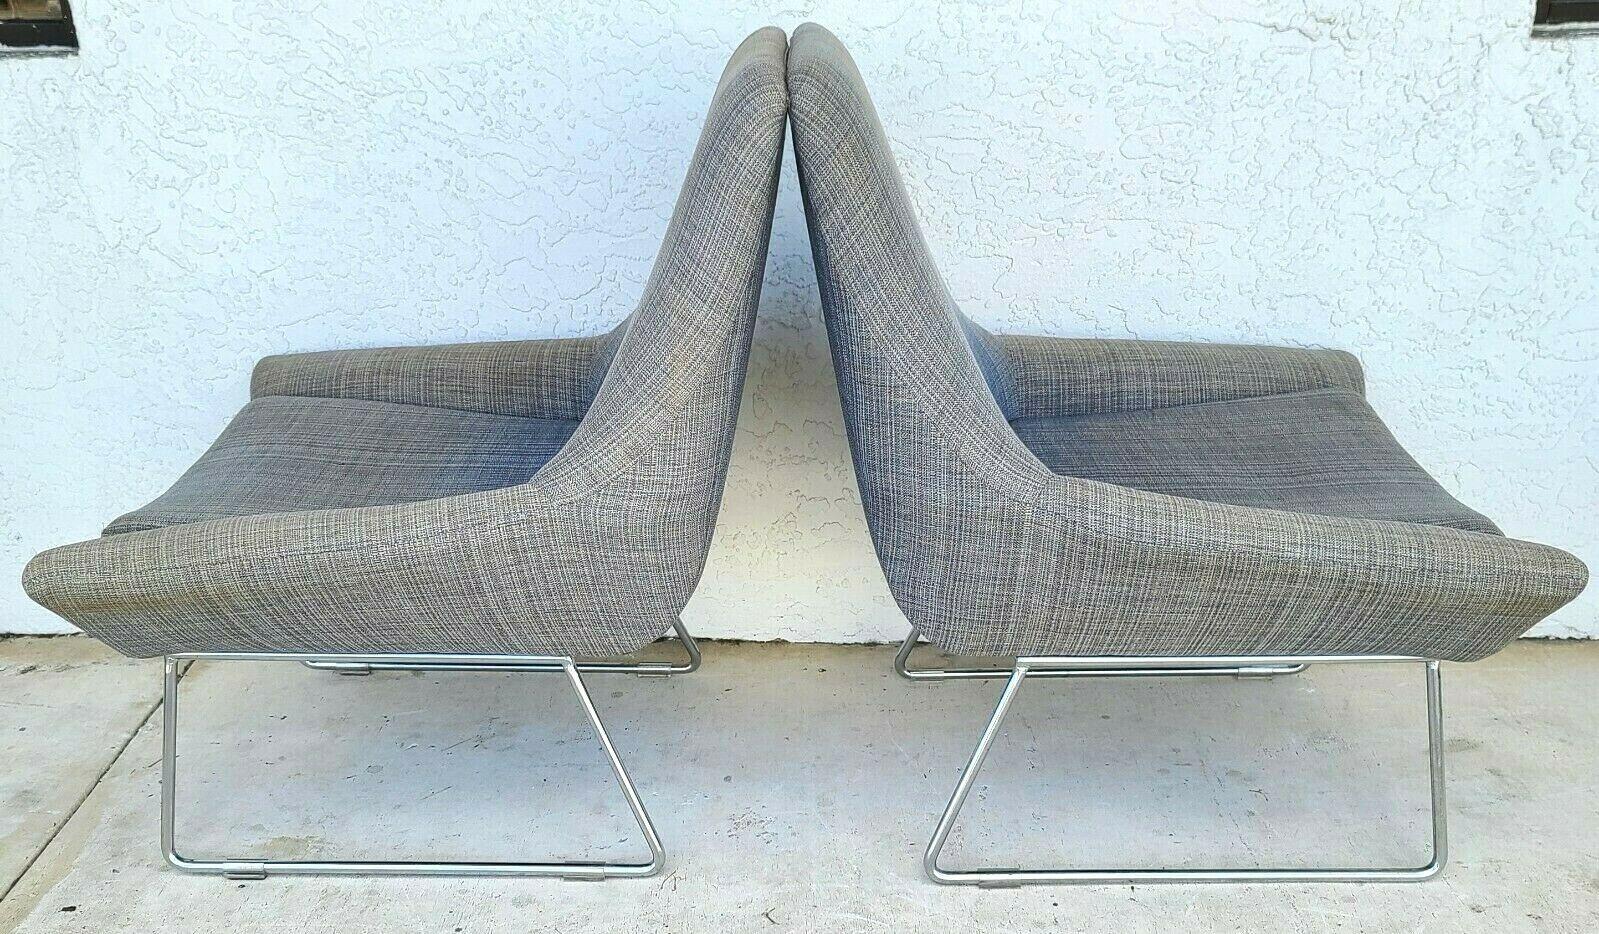 Offering one of our recent palm beach estate fine furniture acquisitions of a 
Pair of Mid-Century Modern Flow Lounge Chairs Attributed to Tom Lloyd & Luke Pearson for Walter Knoll

Approximate measurements in inches
37.5